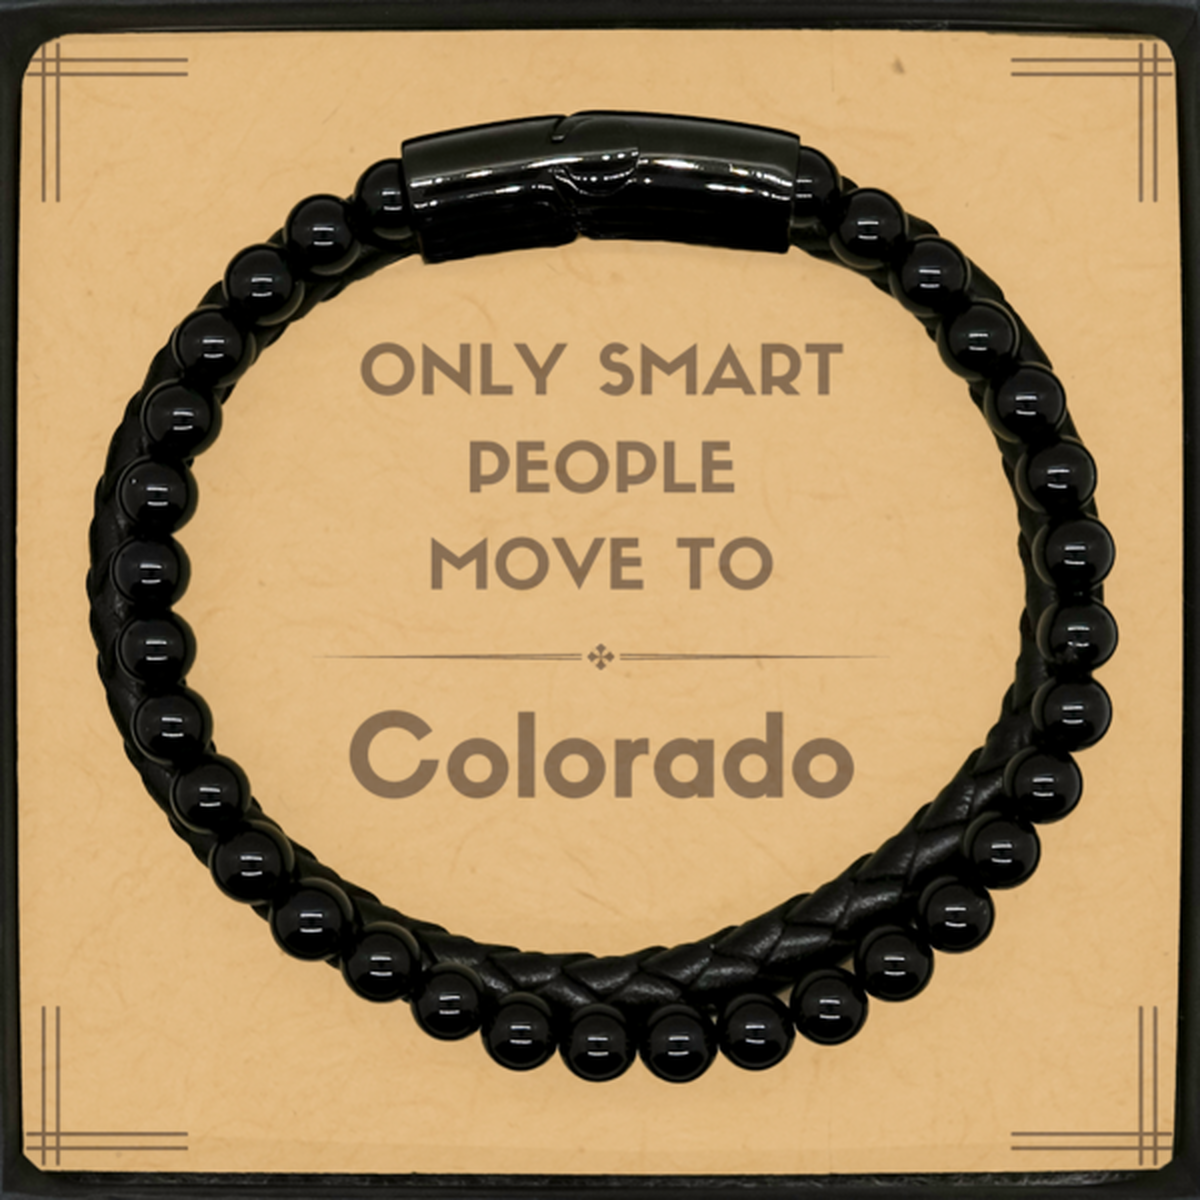 Only smart people move to Colorado Stone Leather Bracelets, Message Card Gifts For Colorado, Move to Colorado Gifts for Friends Coworker Funny Saying Quote